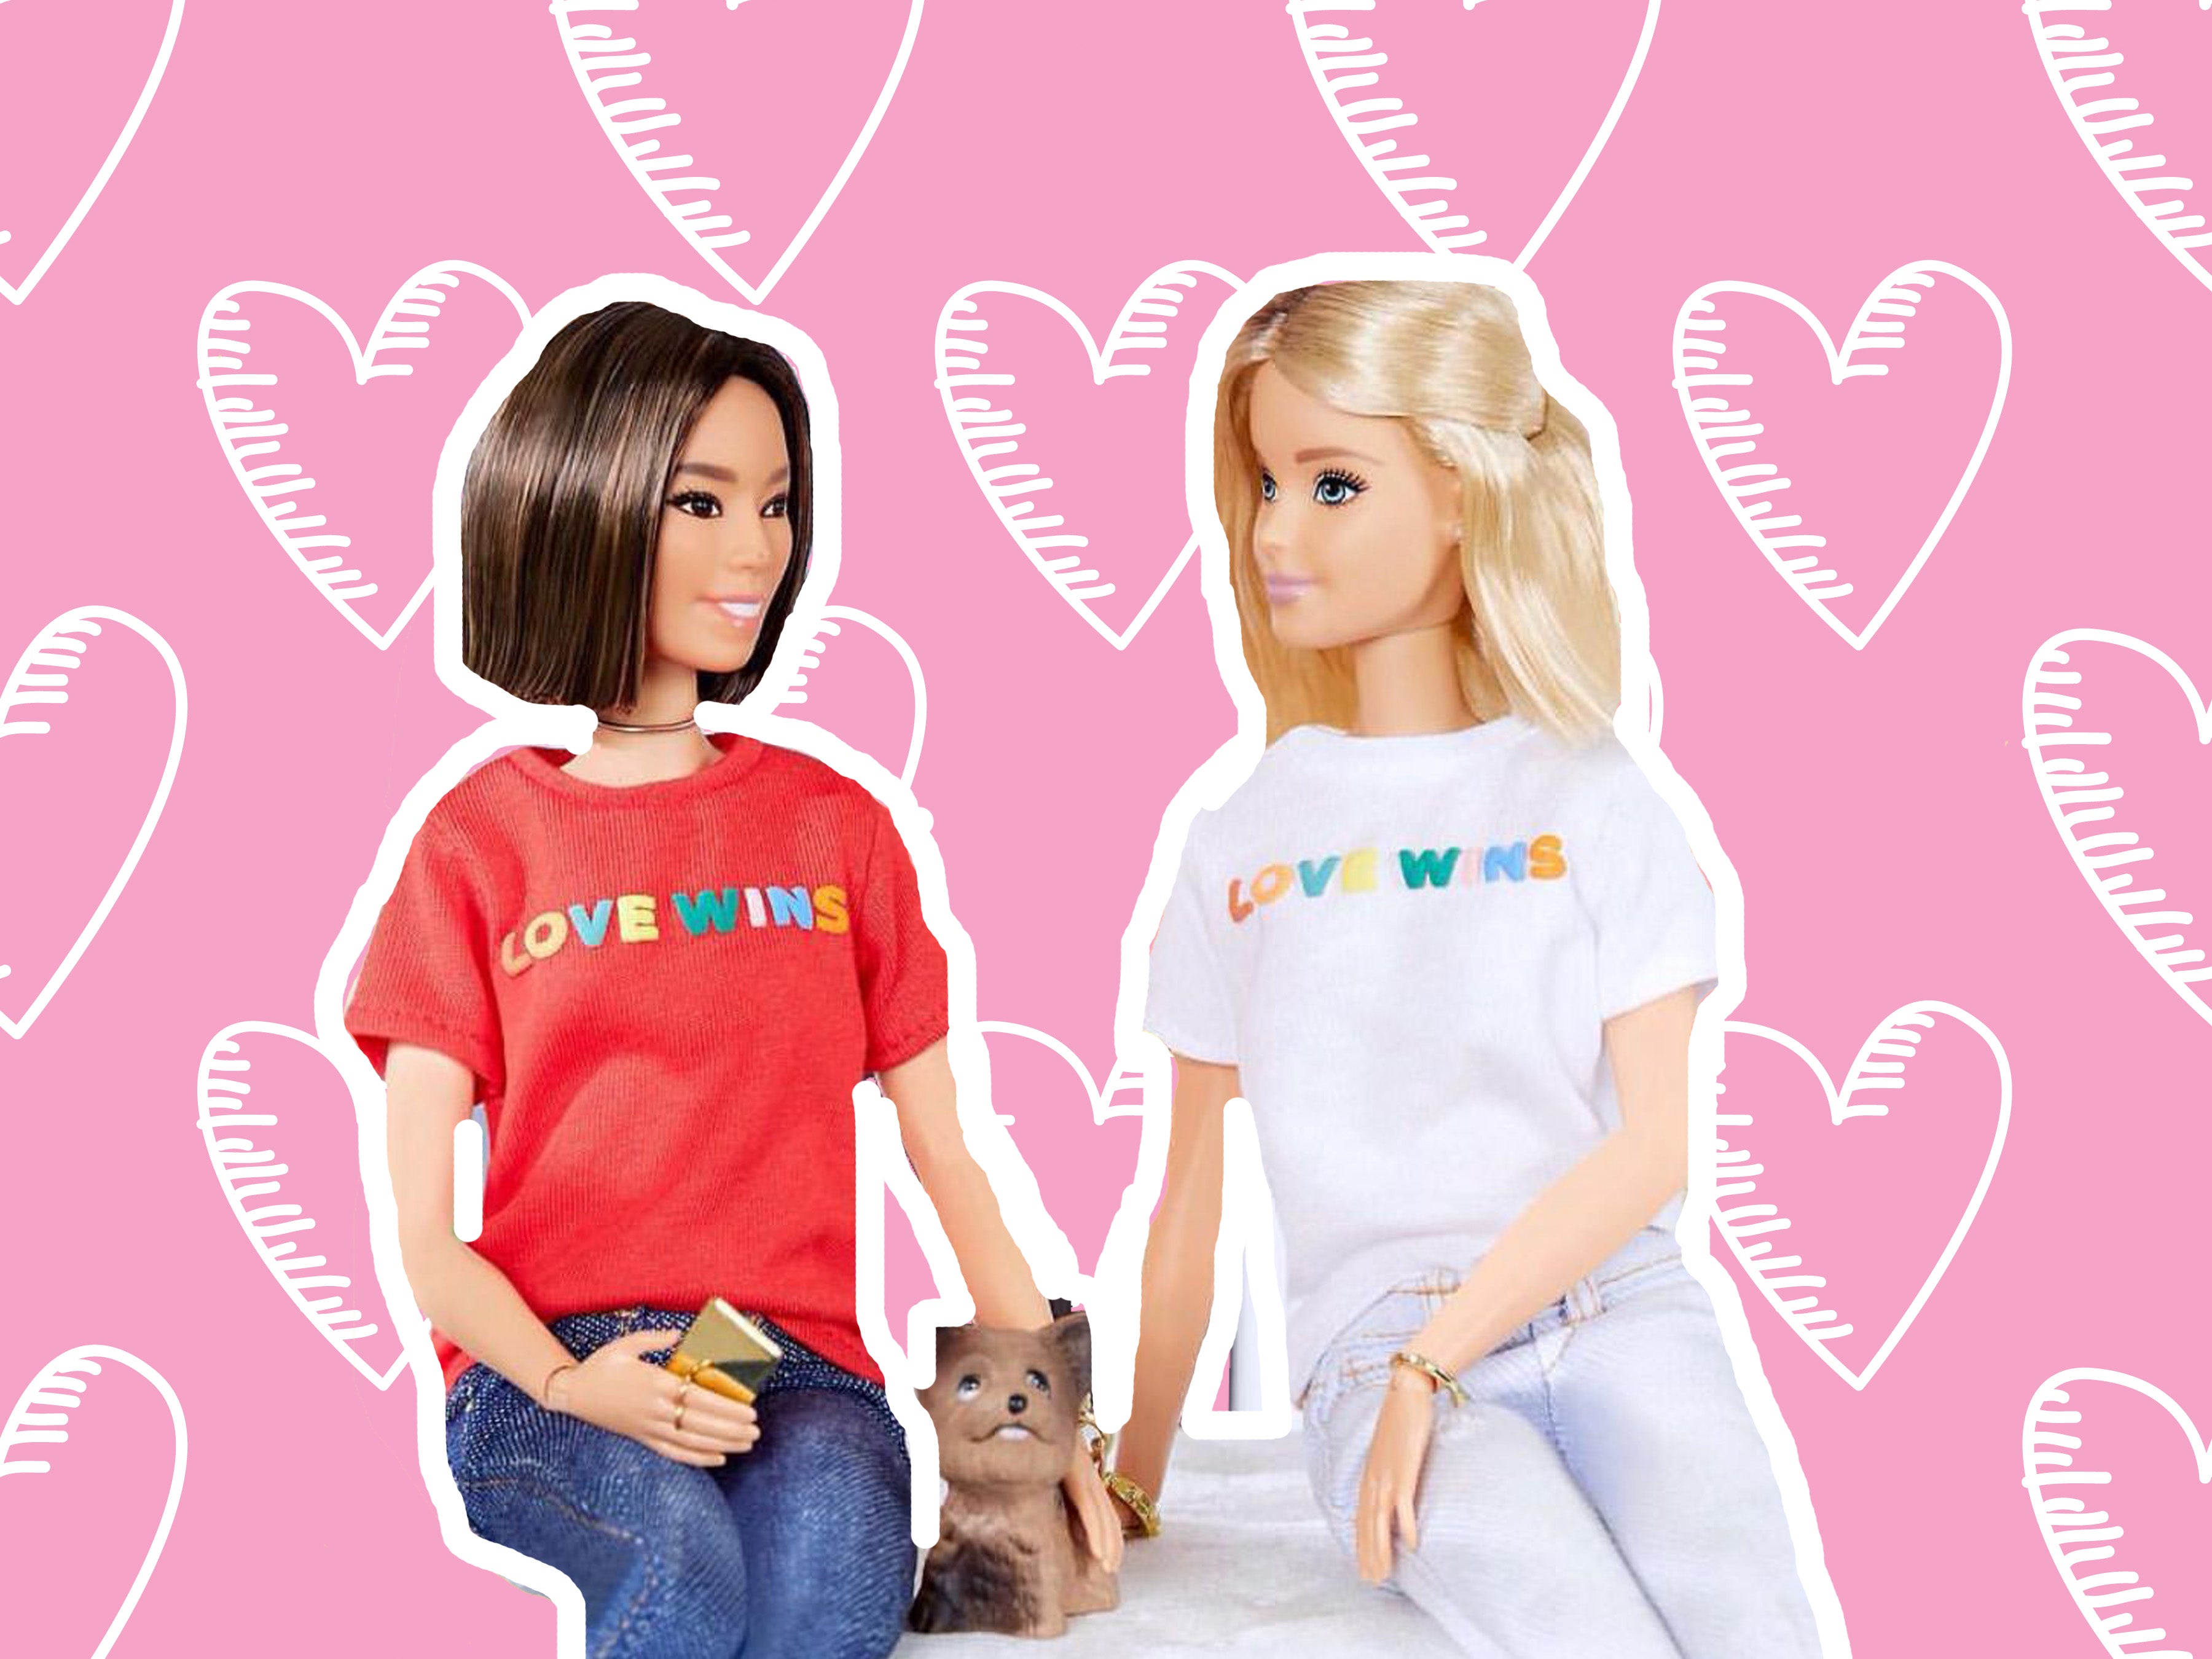 Does Barbie really have a girlfriend now? The Independent photo